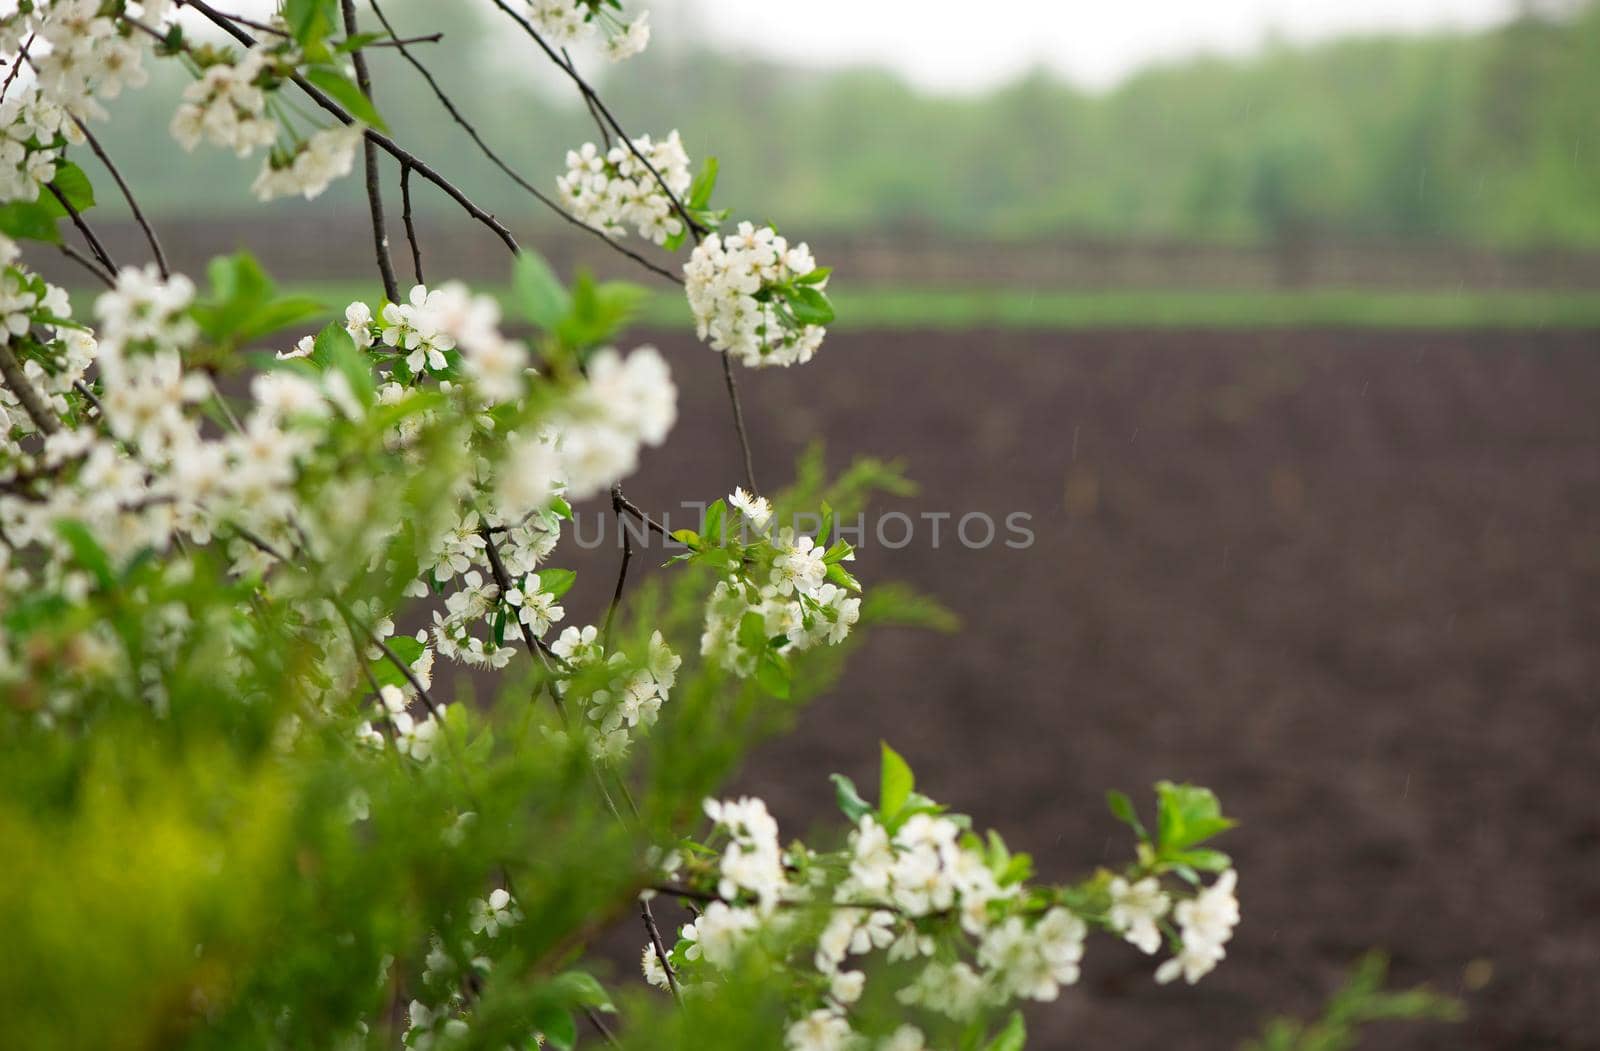 plowed field and a branch of blossoming paradise apple blooming apple trees by aprilphoto